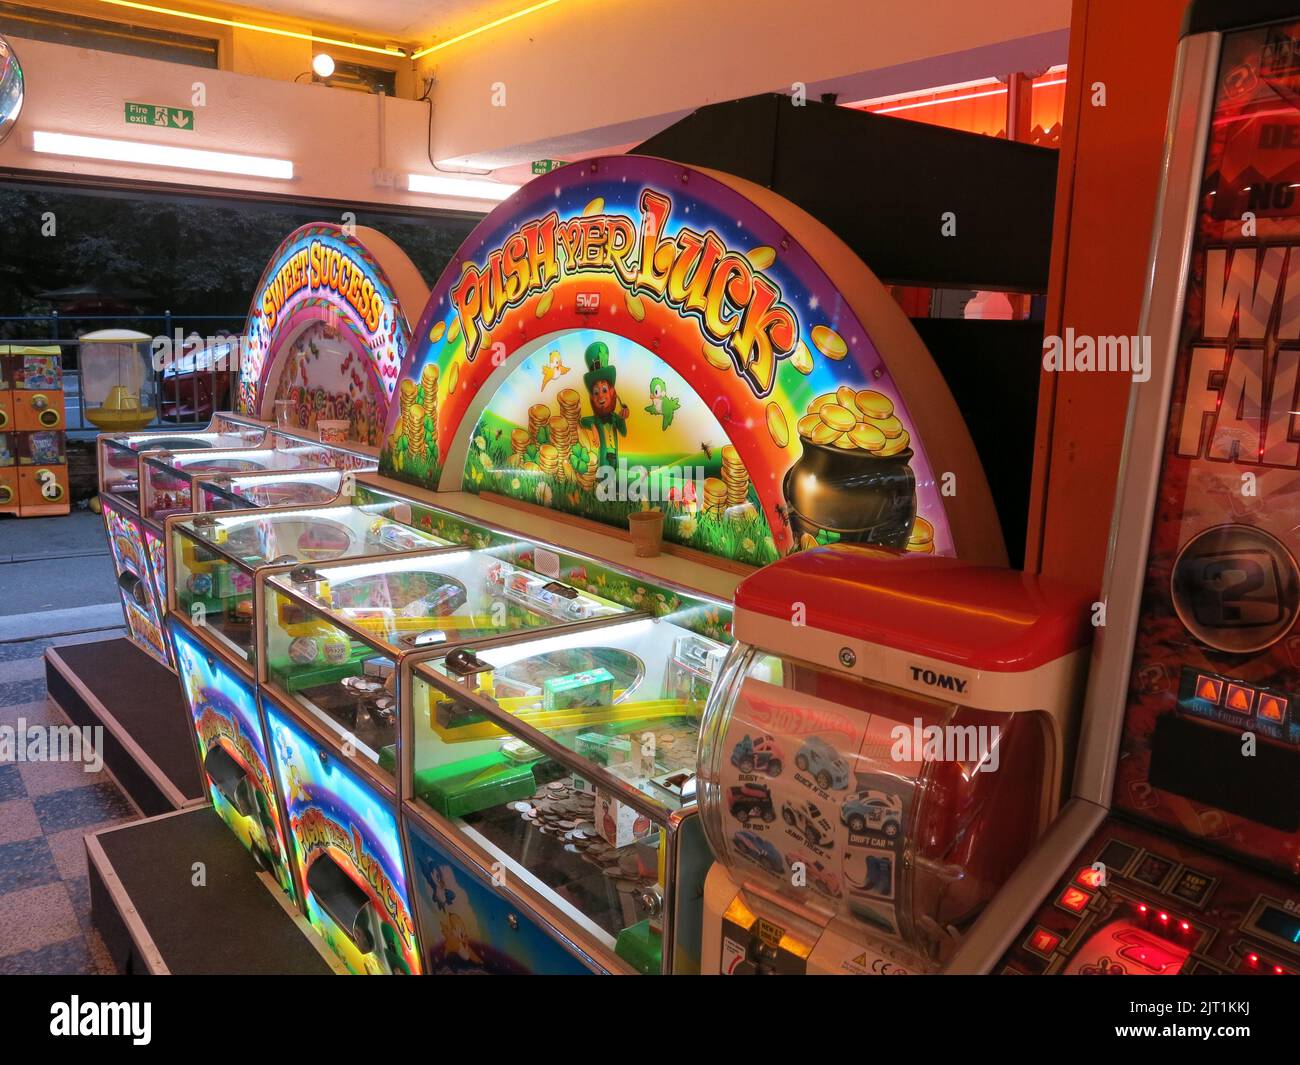 The traditional English seaside holiday: one of the games in an amusement arcade to 'Push Yer Luck' at tipping the coins off a tray. Stock Photo